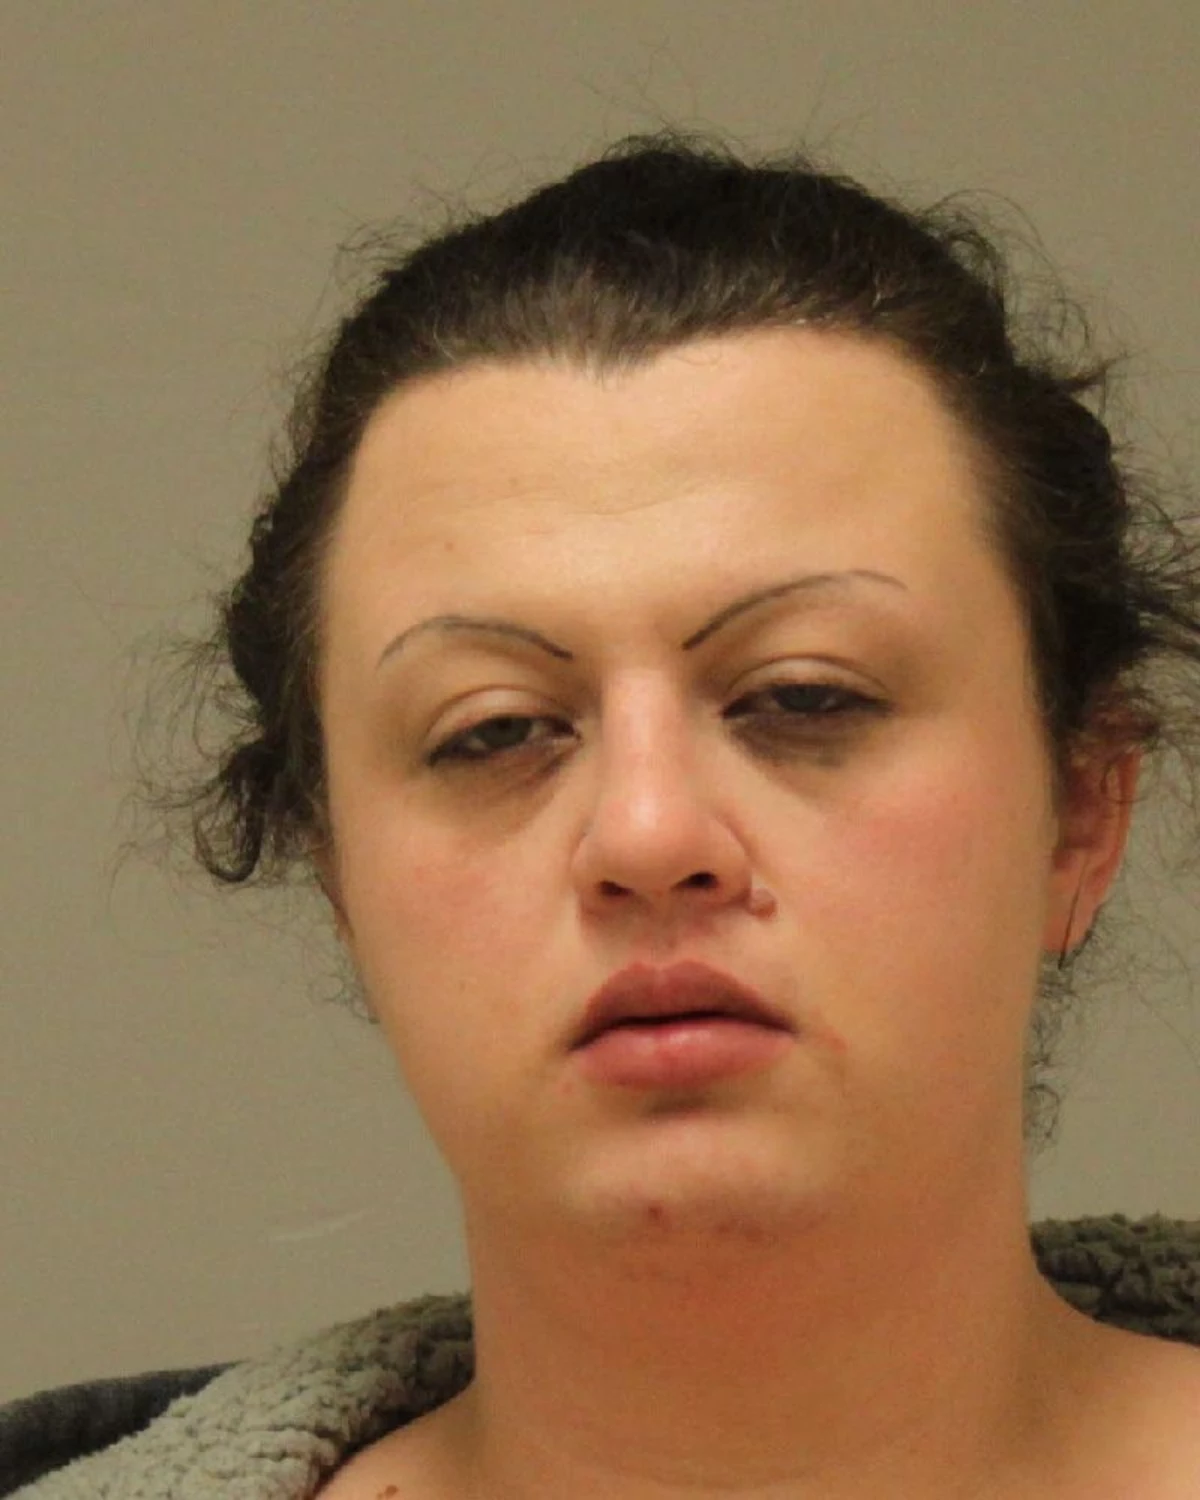 Wyoming Michigan Woman Arrested for Craigslist Ex ...